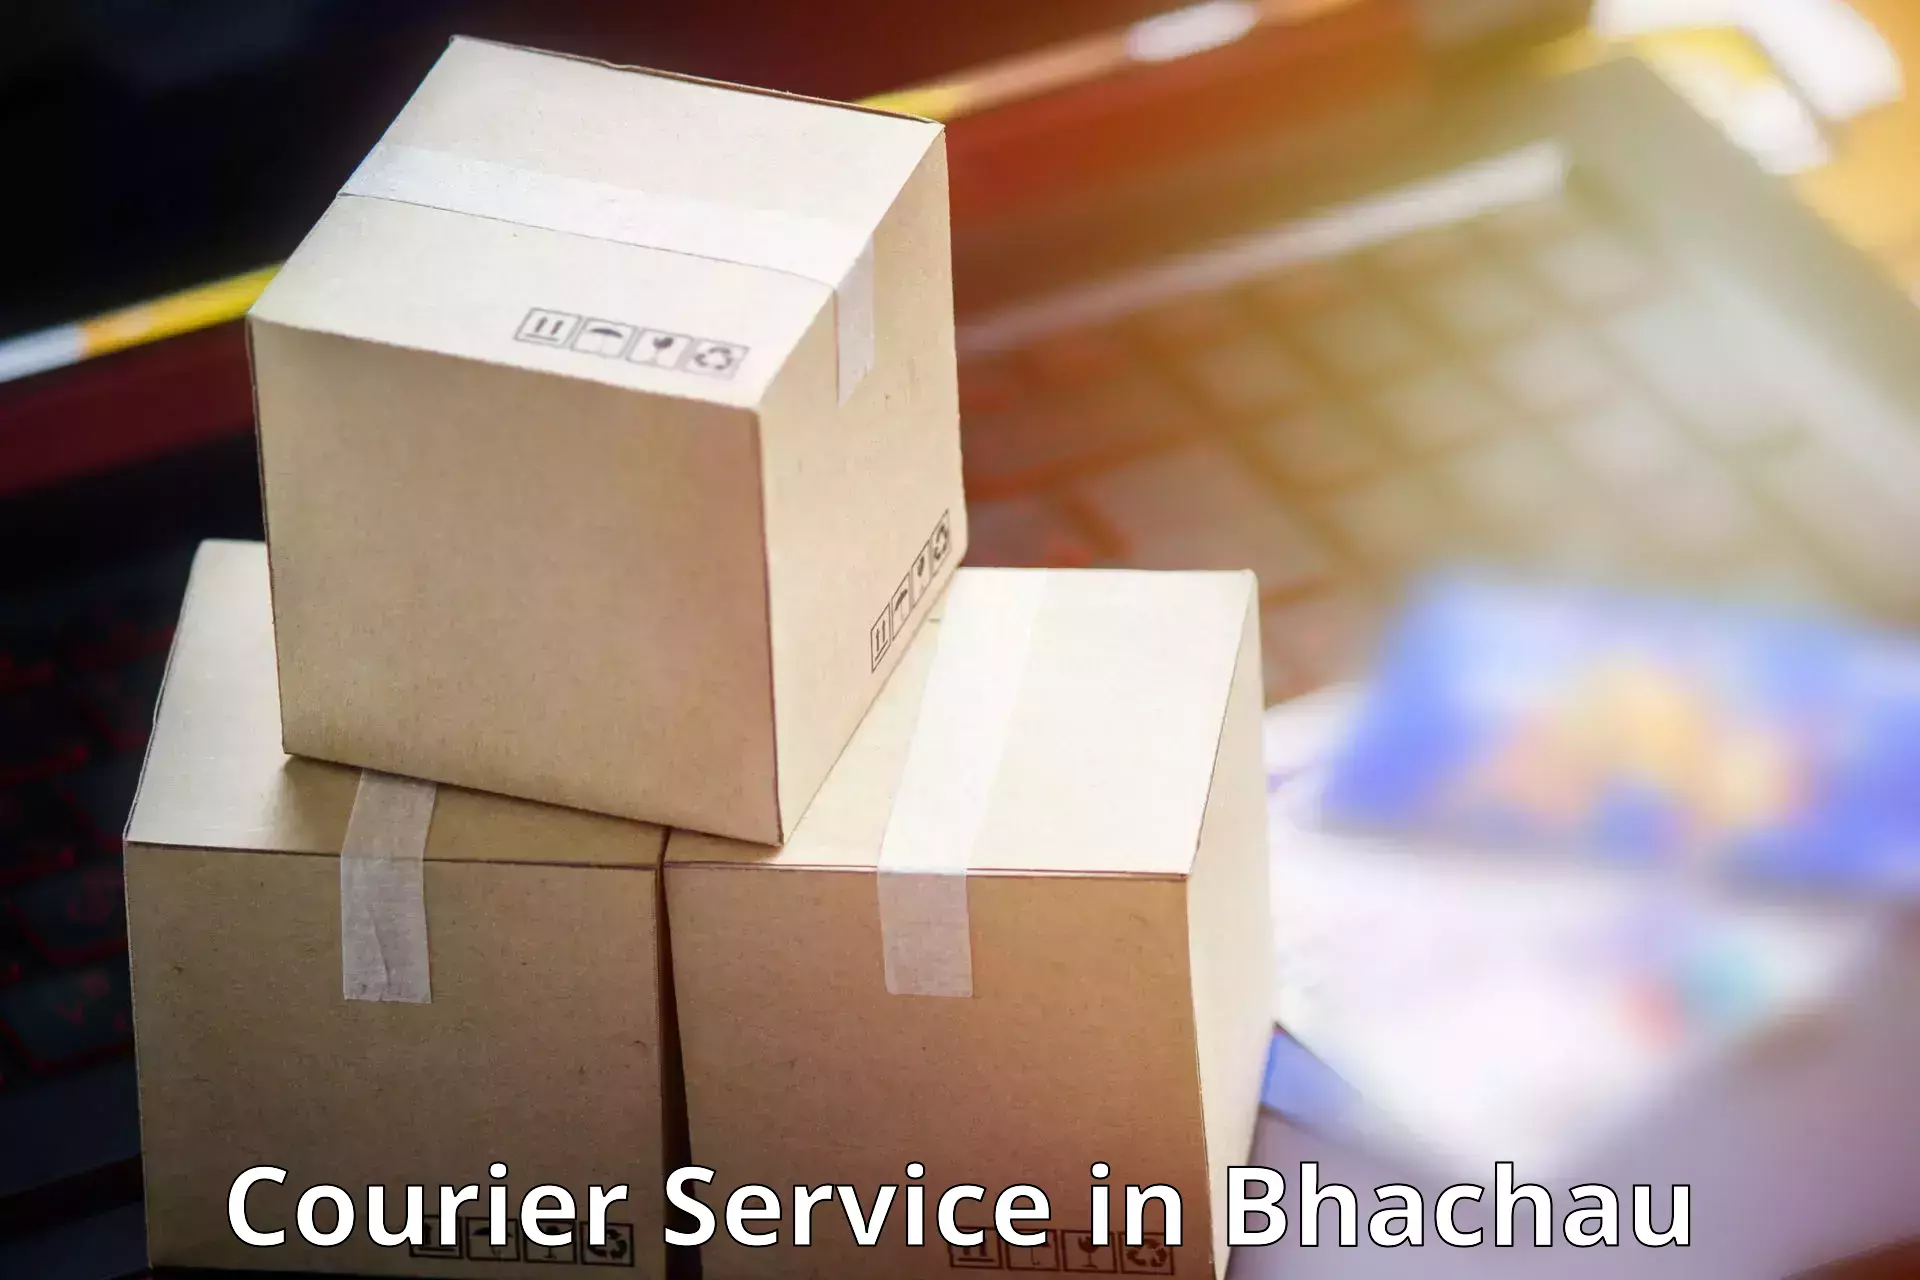 Affordable logistics services in Bhachau